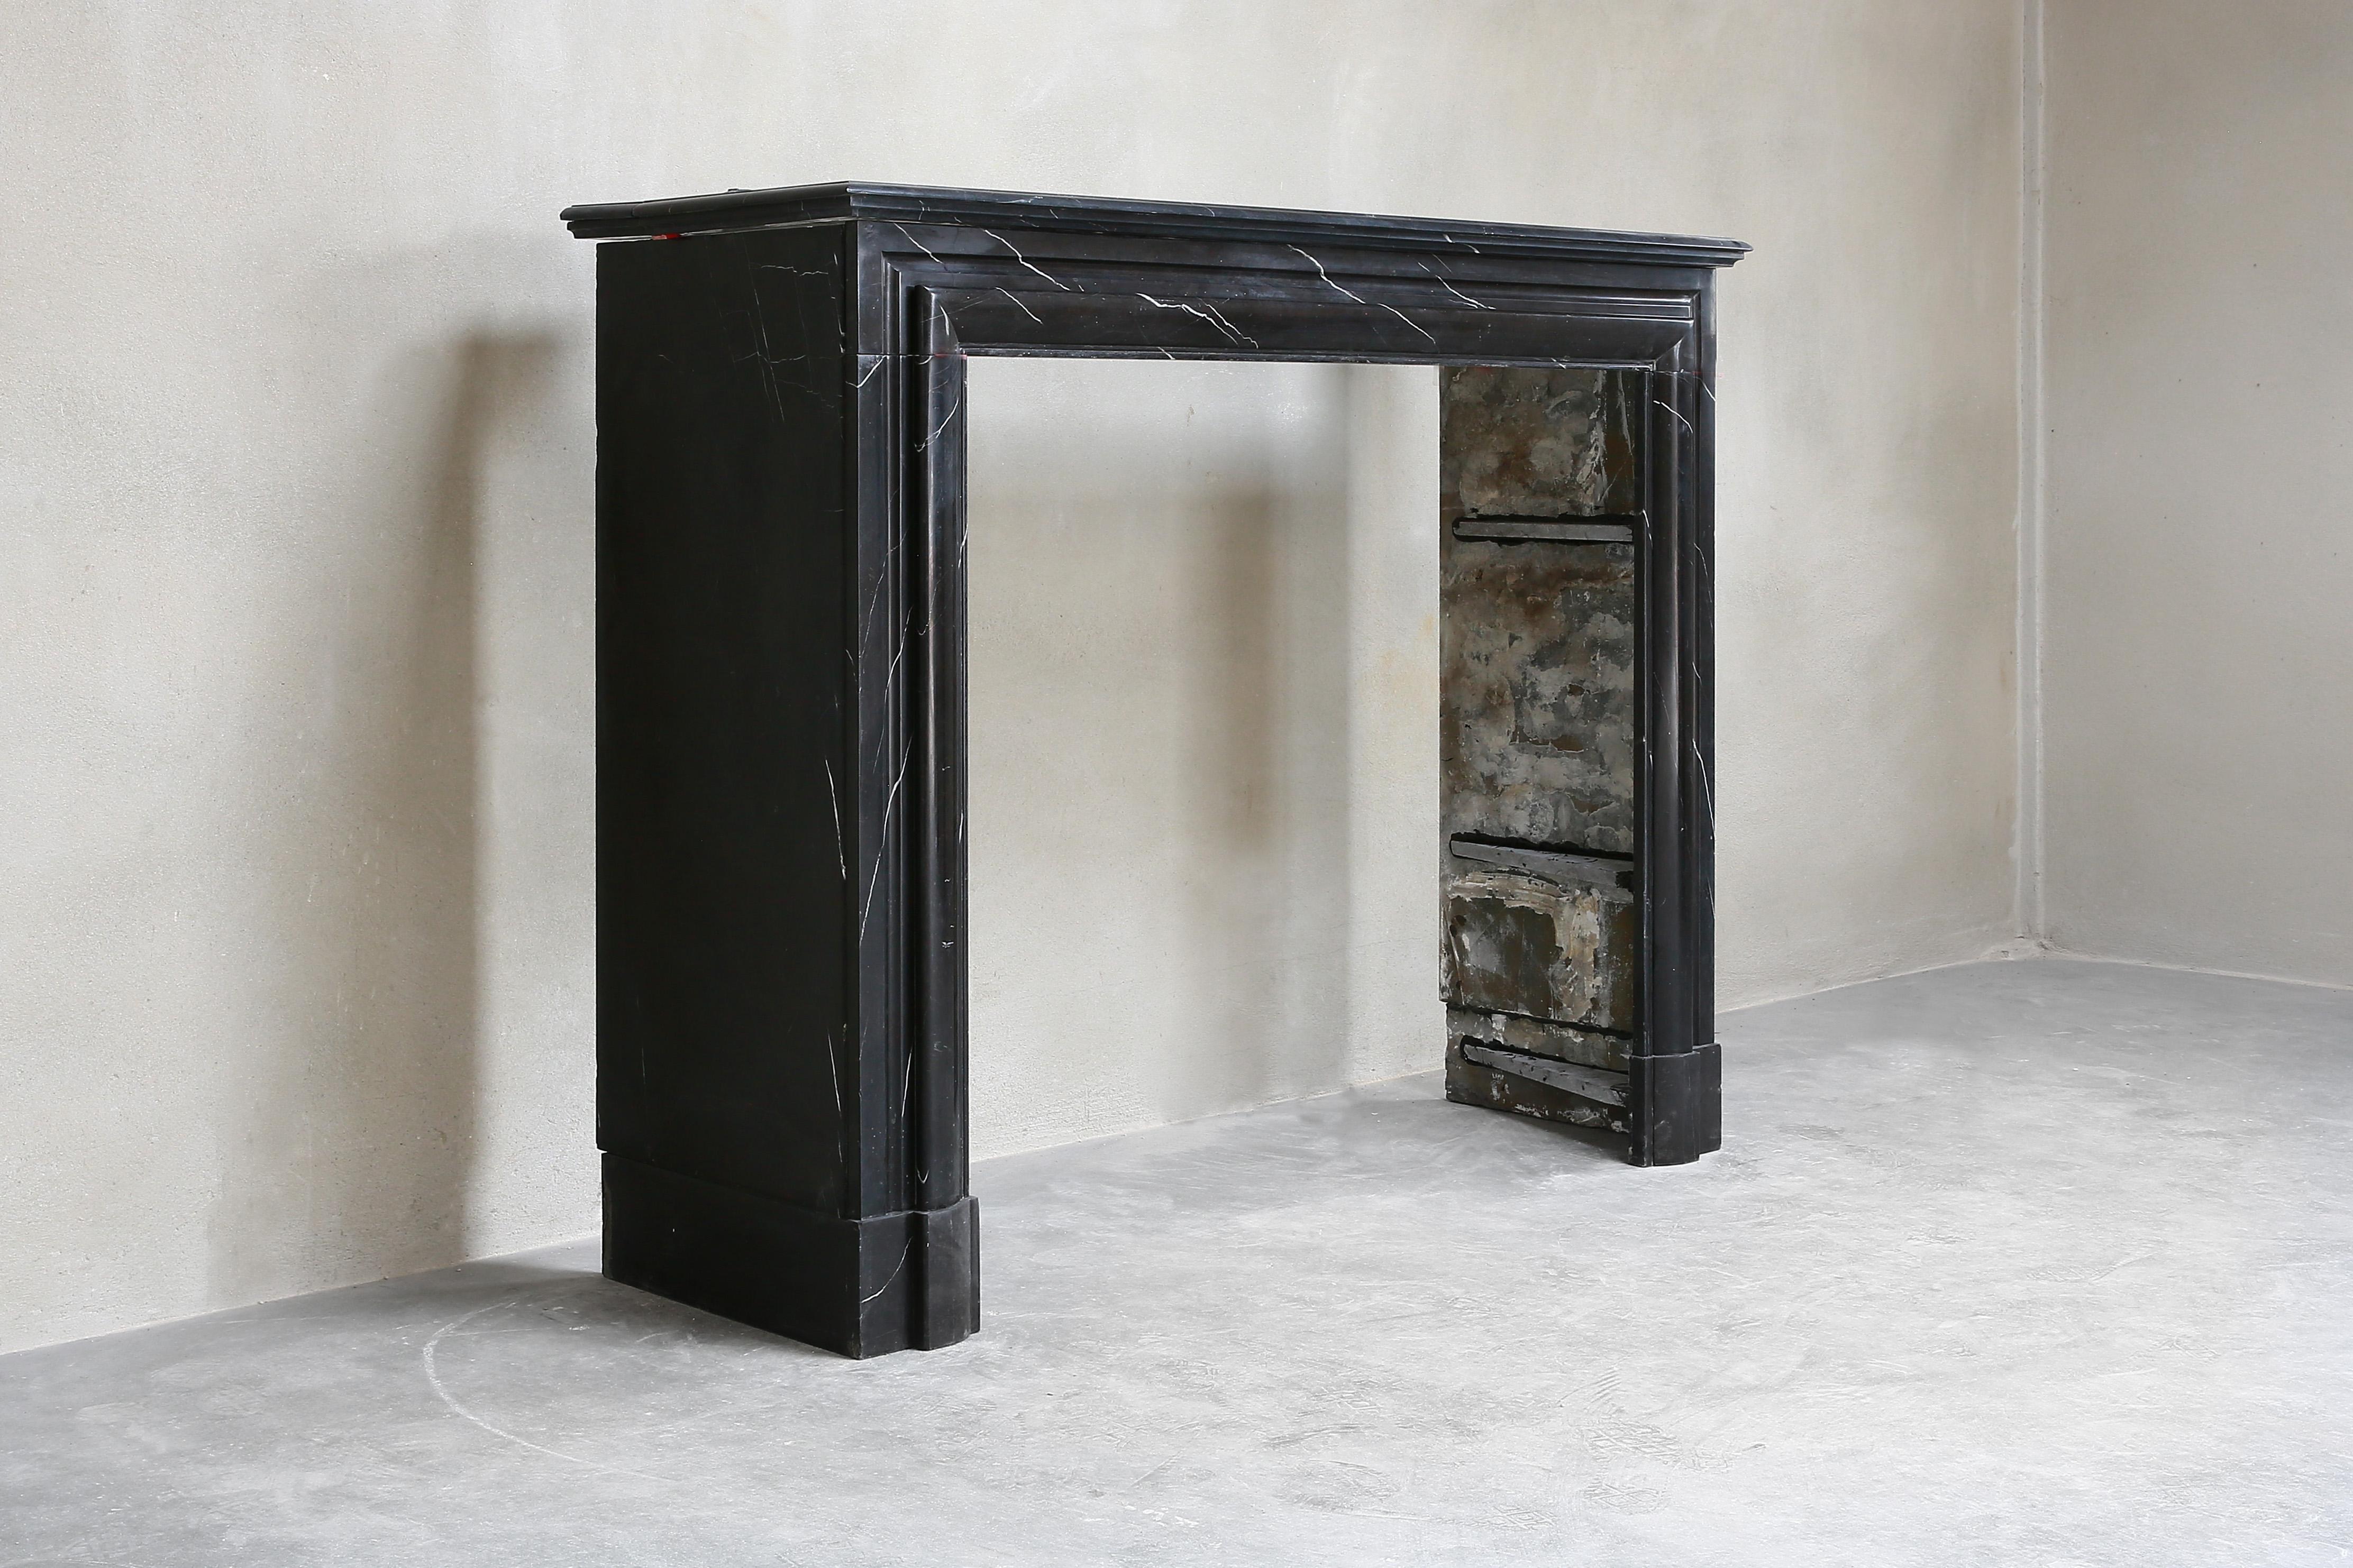 Beautiful antique fireplace made of black marble. This black marble type is called Nero Marquina and has a beautiful black color with light veins. A unique fireplace, because it is a natural product and every natural product is different. This